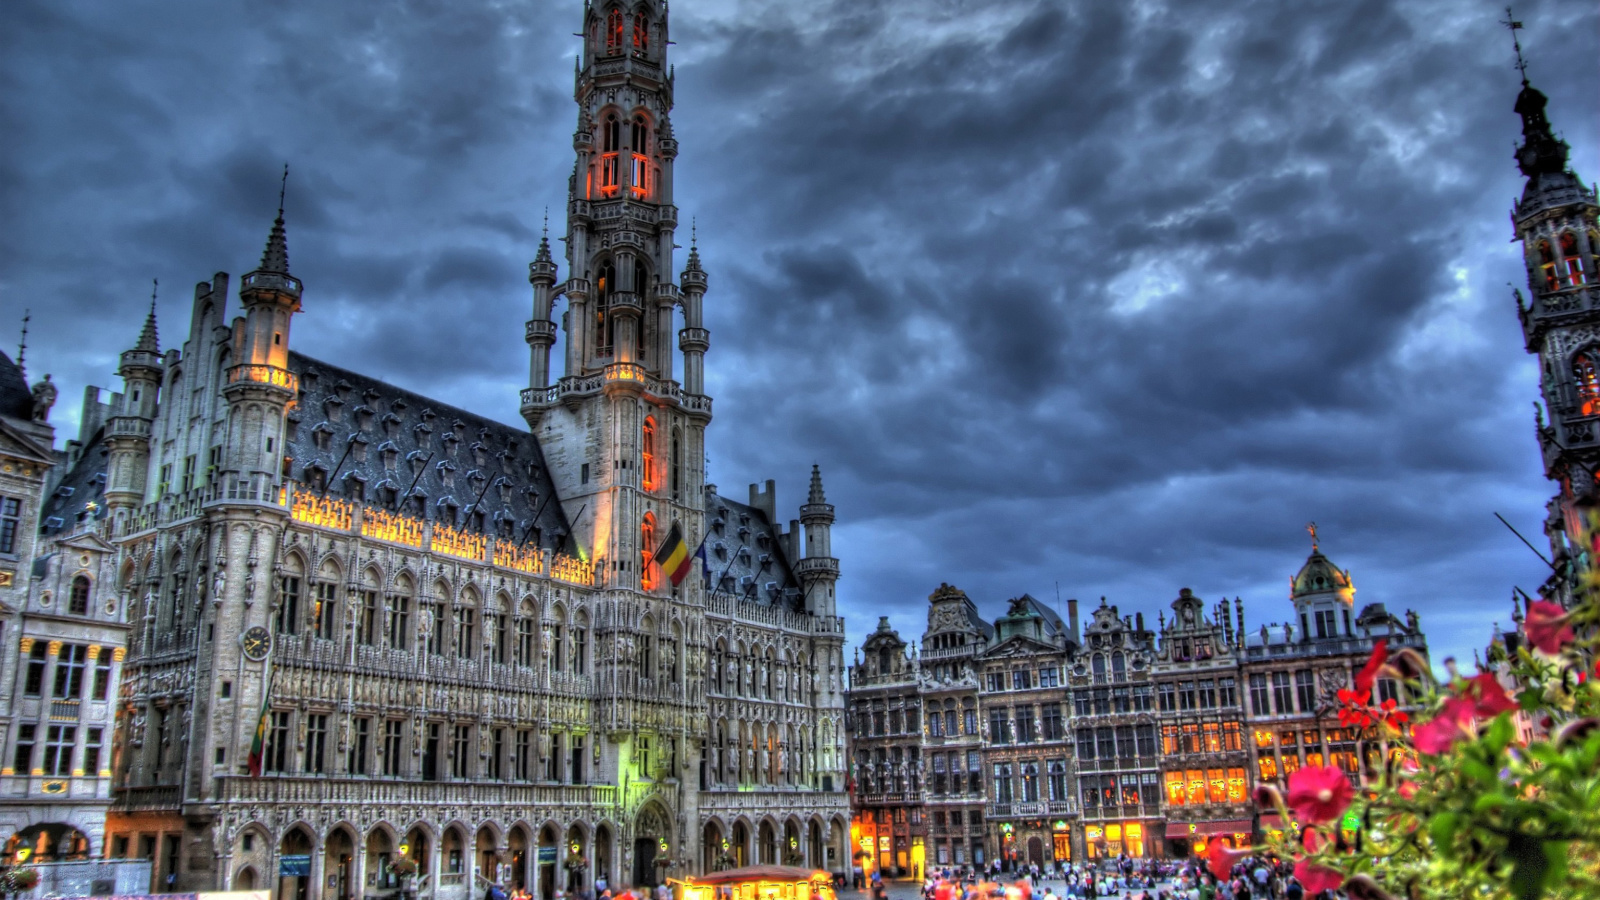 Brussels Grote Markt and Town Hall screenshot #1 1600x900